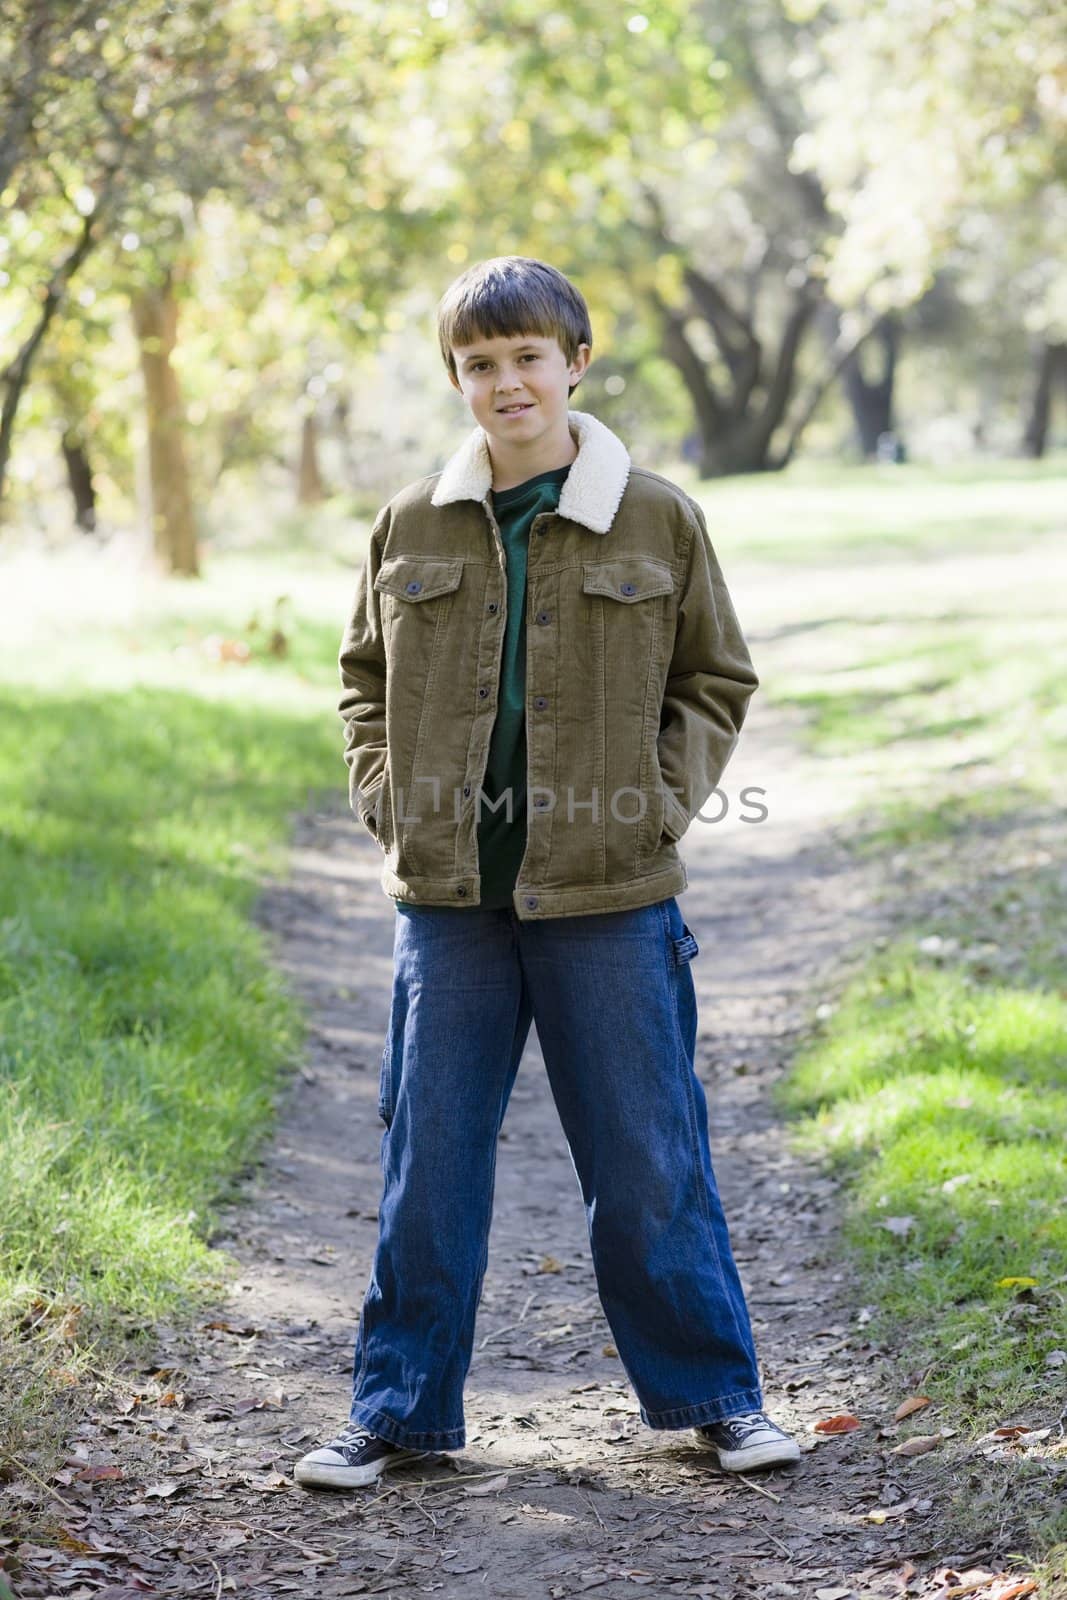 Cute Young Boy Standing with Hands in Pockets on a Path in a Park